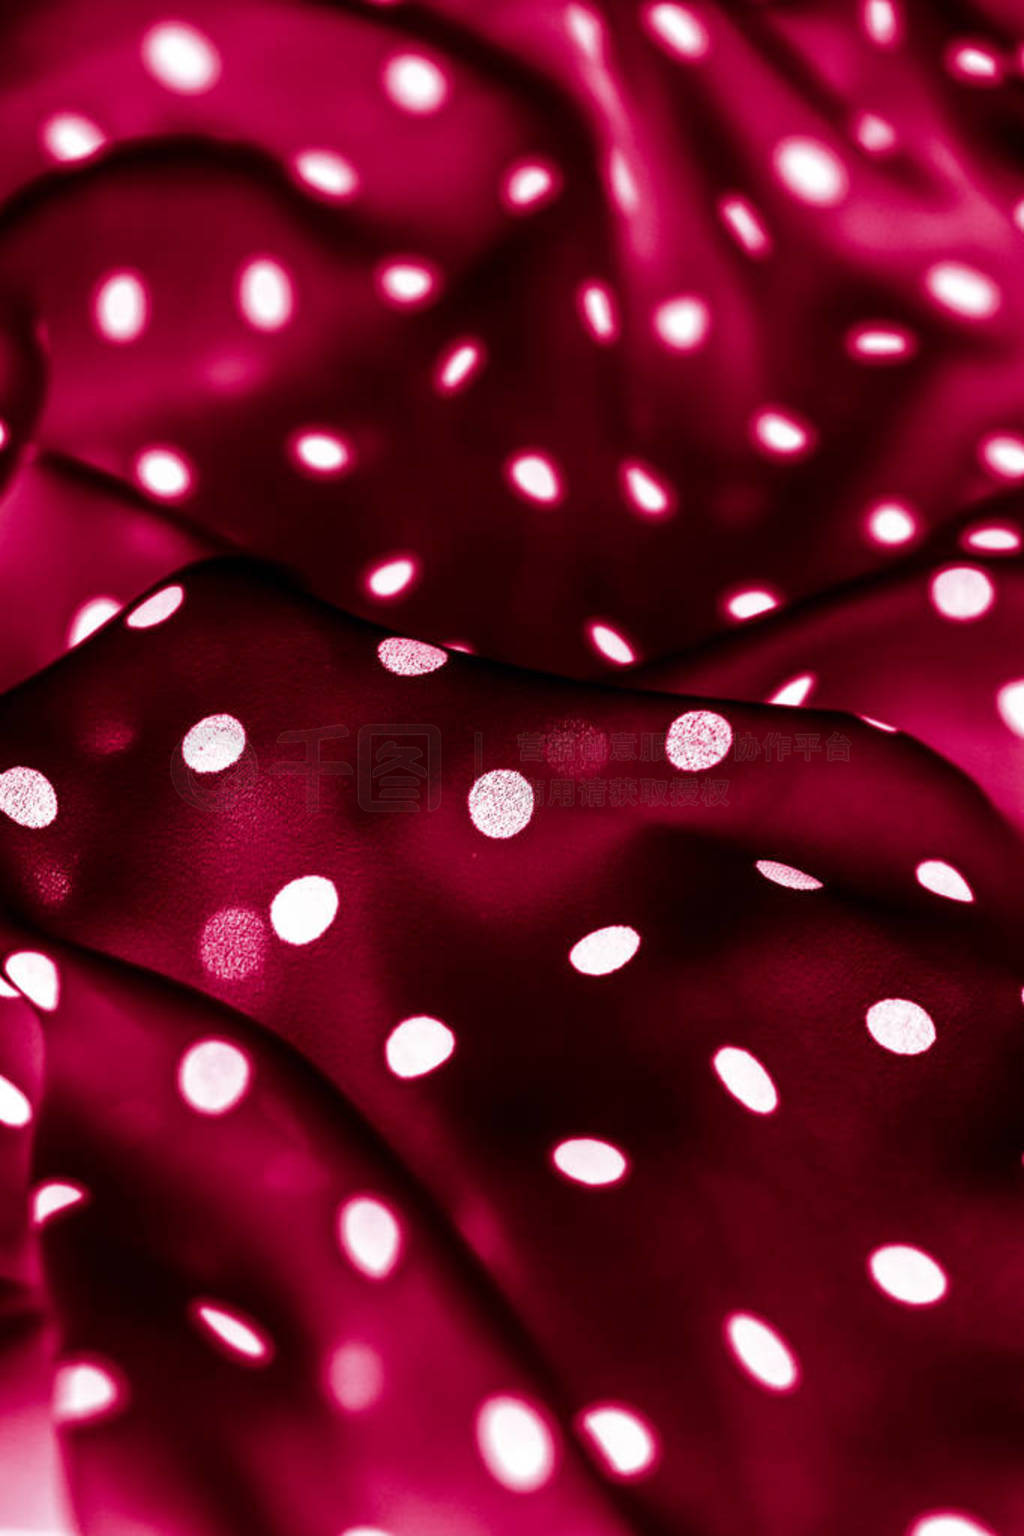 Classic polka dot textile background texture, white dots on red